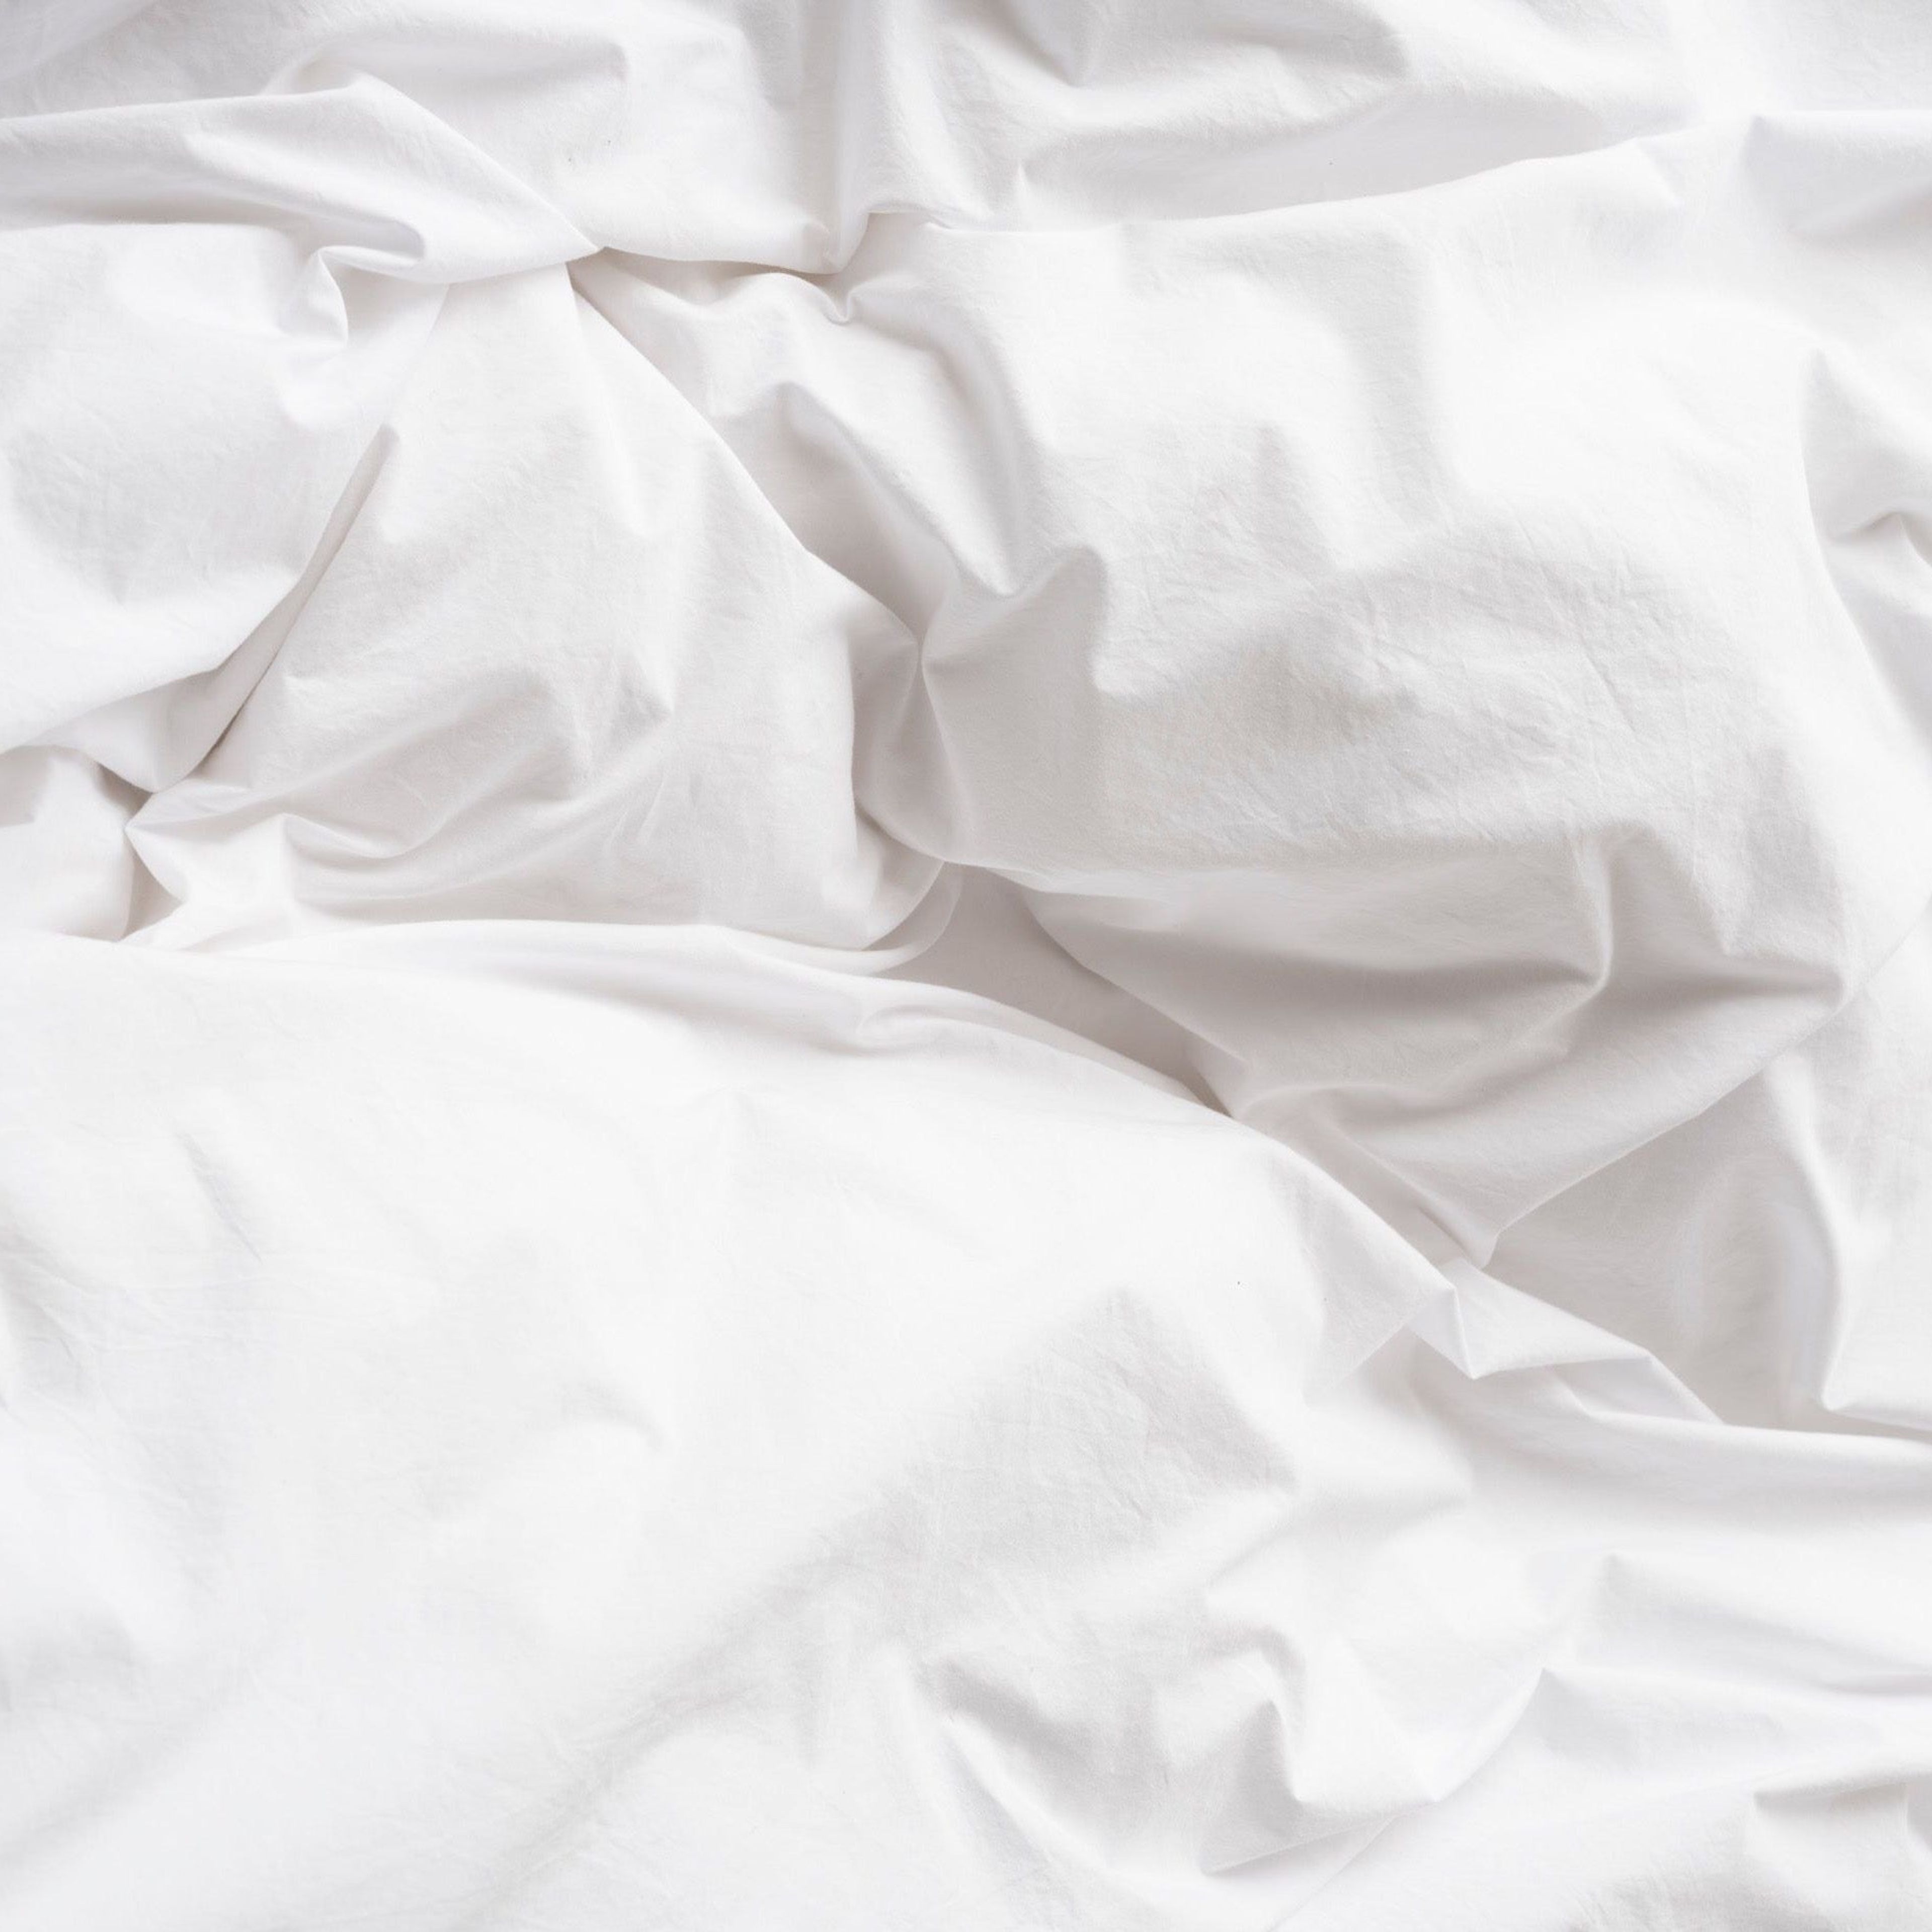 Relaxed Percale Sheet Set